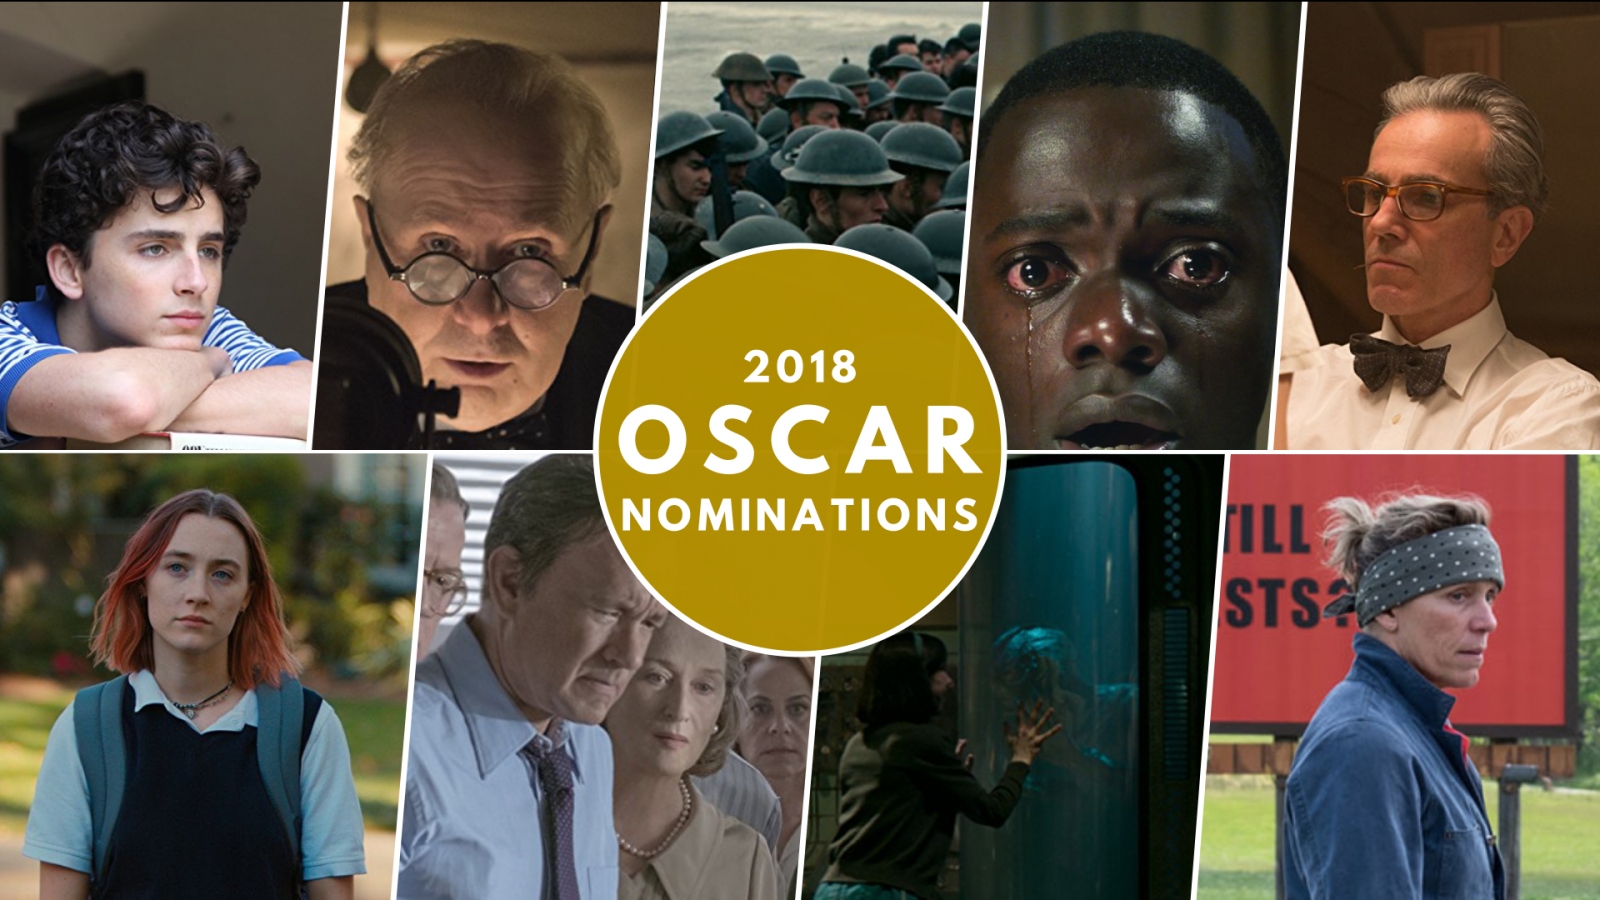 Oscar nominations 2018 full list: Shape Of Water leads race with 13 nods